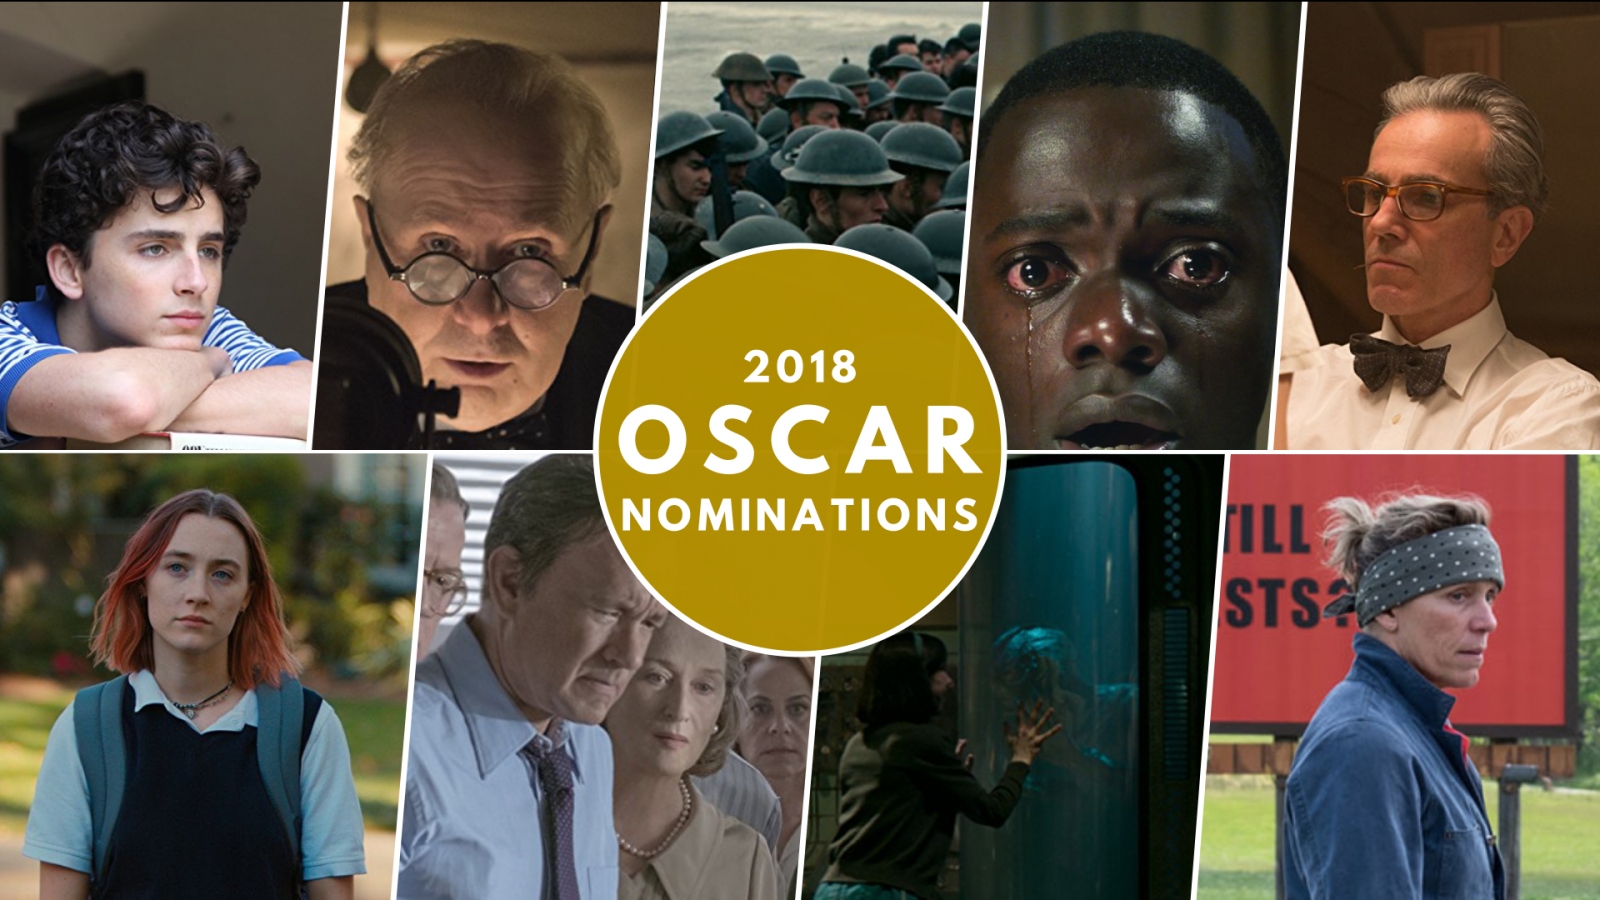 Oscar nominations 2018 full list: Shape Of Water leads race with 13 nods